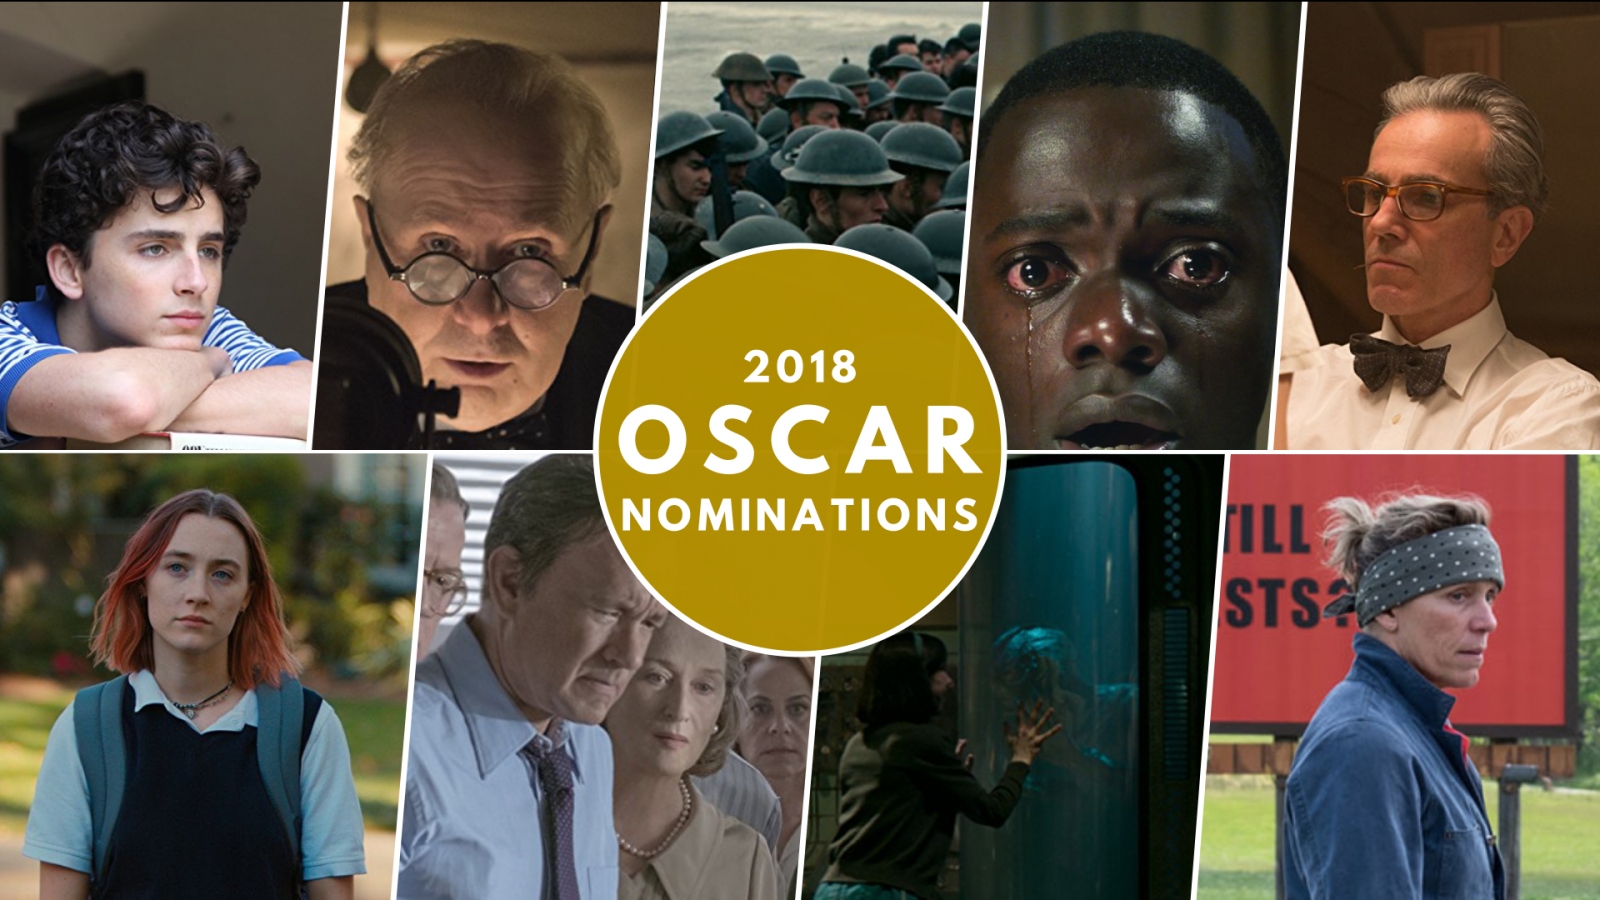 Oscar nominations 2018 full list: Shape Of Water leads race with 13 nods